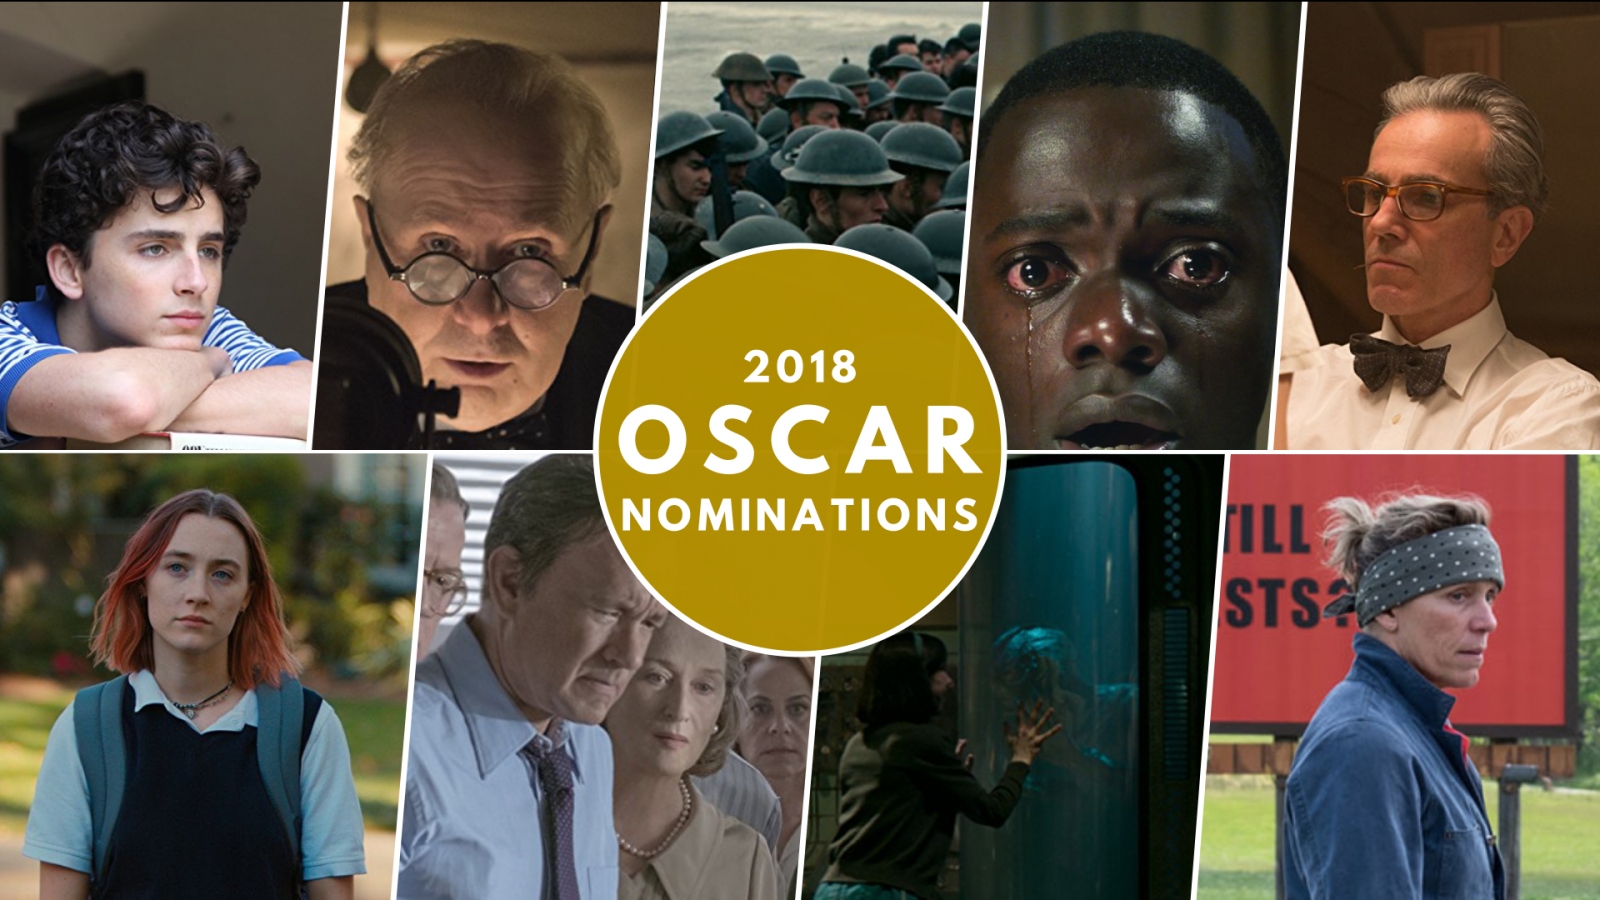 Oscar nominations 2018 full list: Shape Of Water leads race with 13 nods